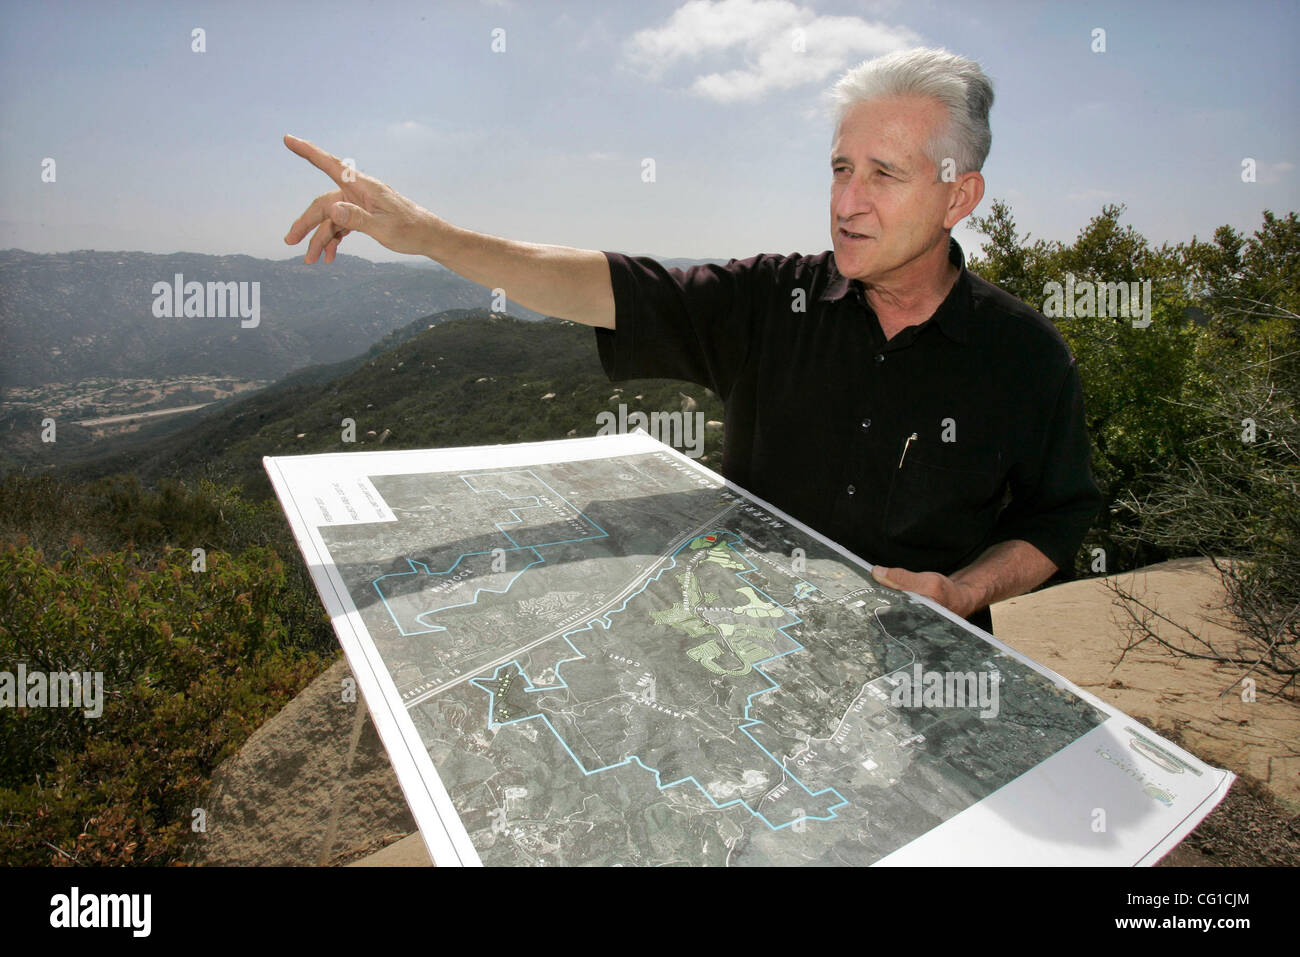 August 6, 2007, North of Escondido, California, USA JOE PERRING, project manager of proposed Merrriam Mountains development, points north in this view looking southeast as he holds a map of the place while standing on one of the higher hills in the northern Preserve section of the development. In th Stock Photo